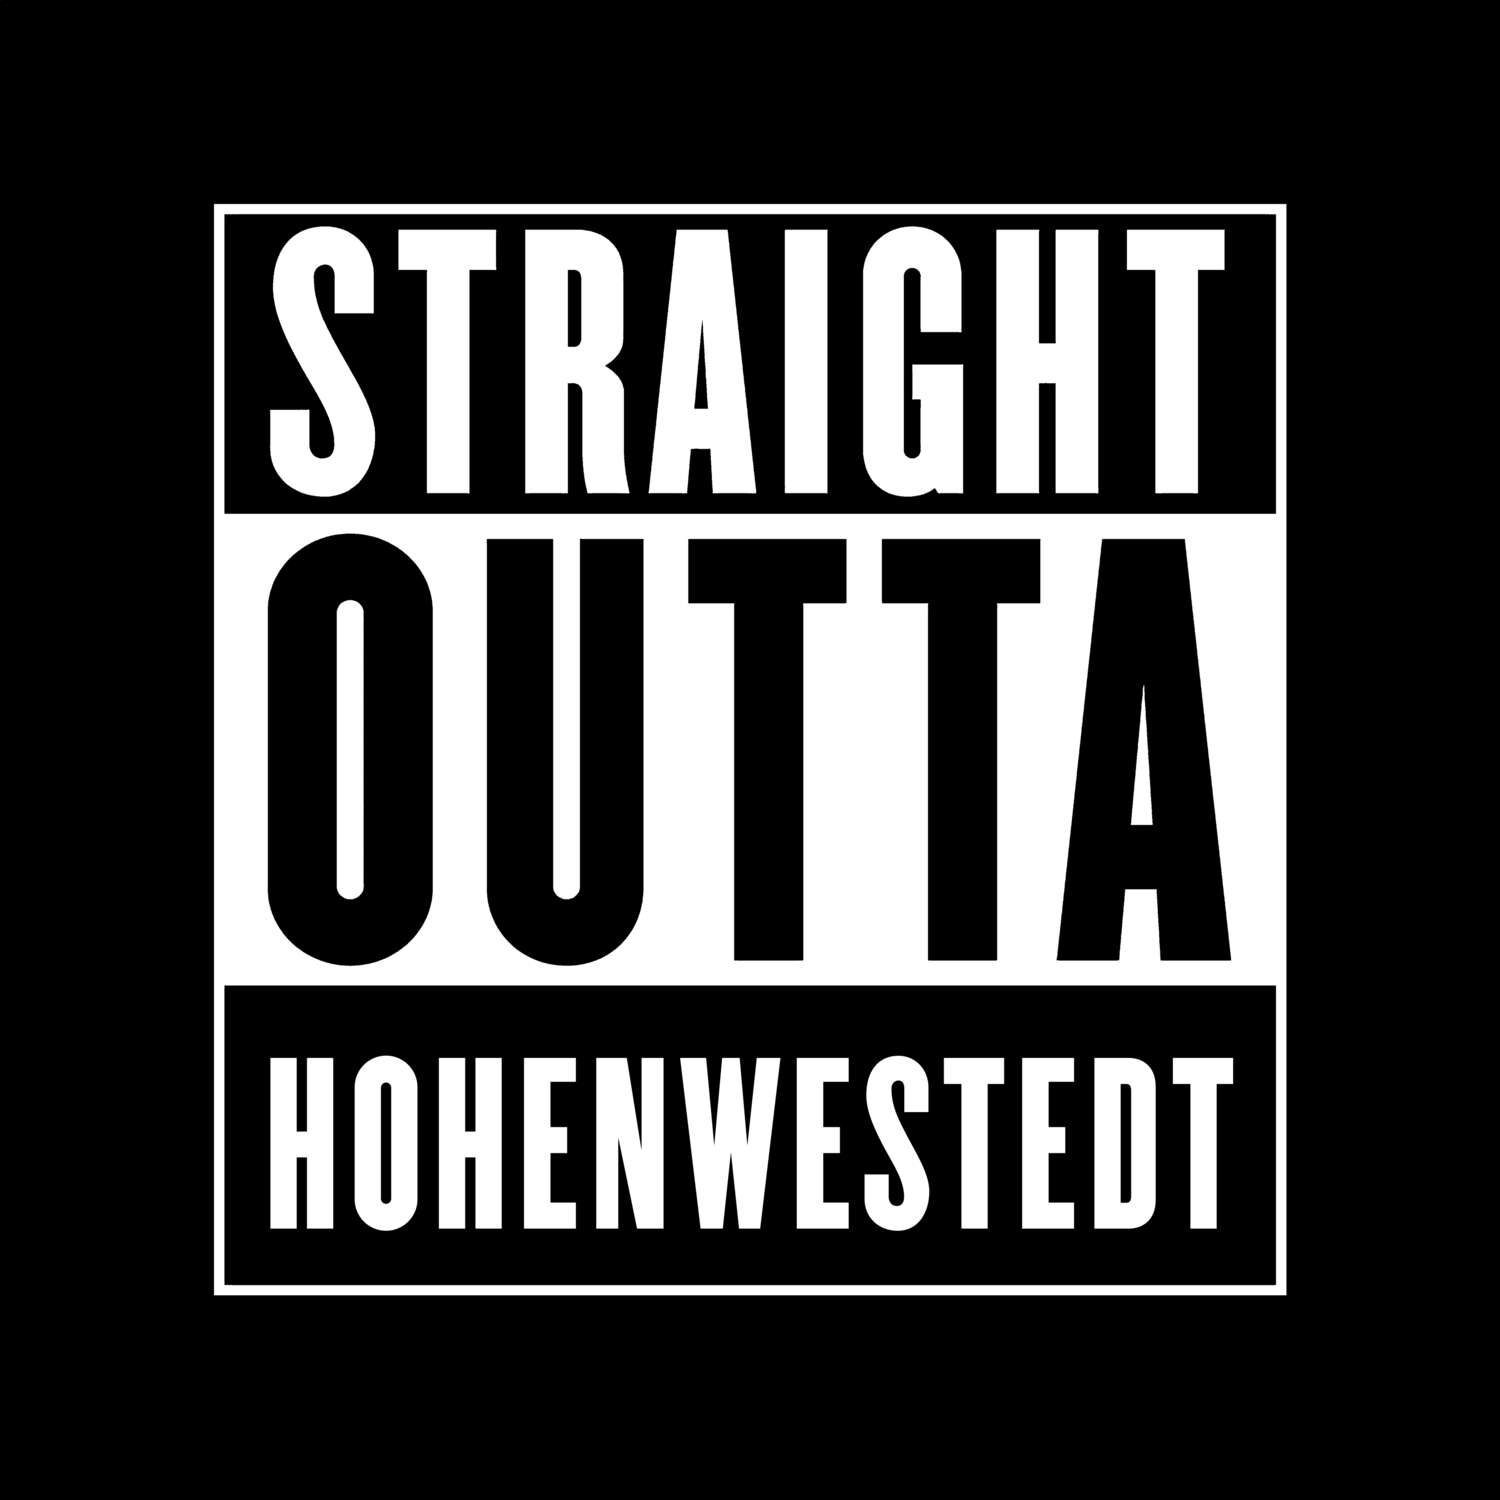 Hohenwestedt T-Shirt »Straight Outta«